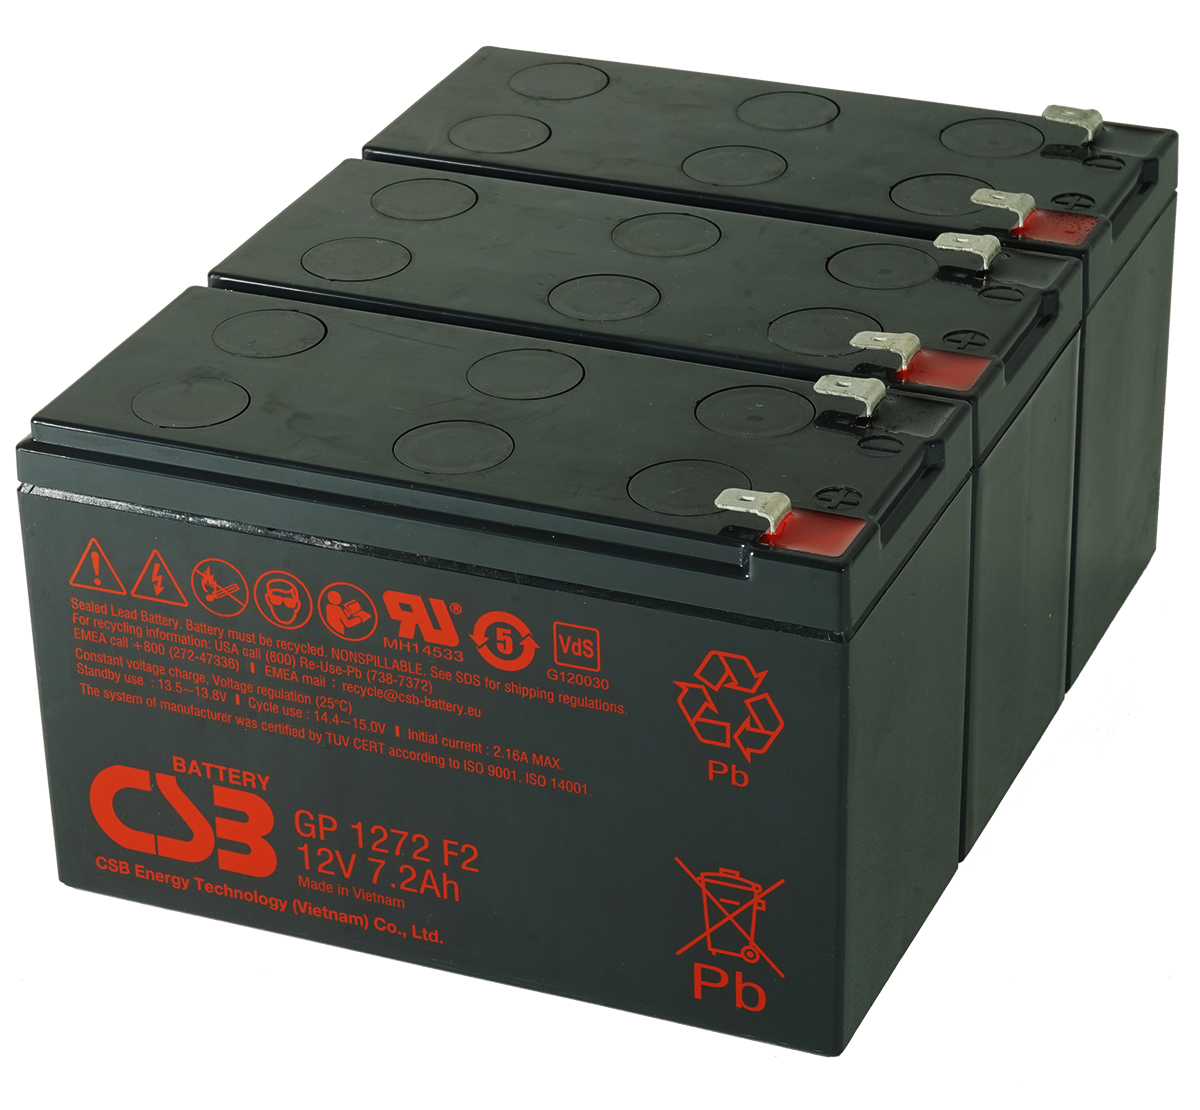 MDS2404 UPS Battery Kit for MGE AB2404